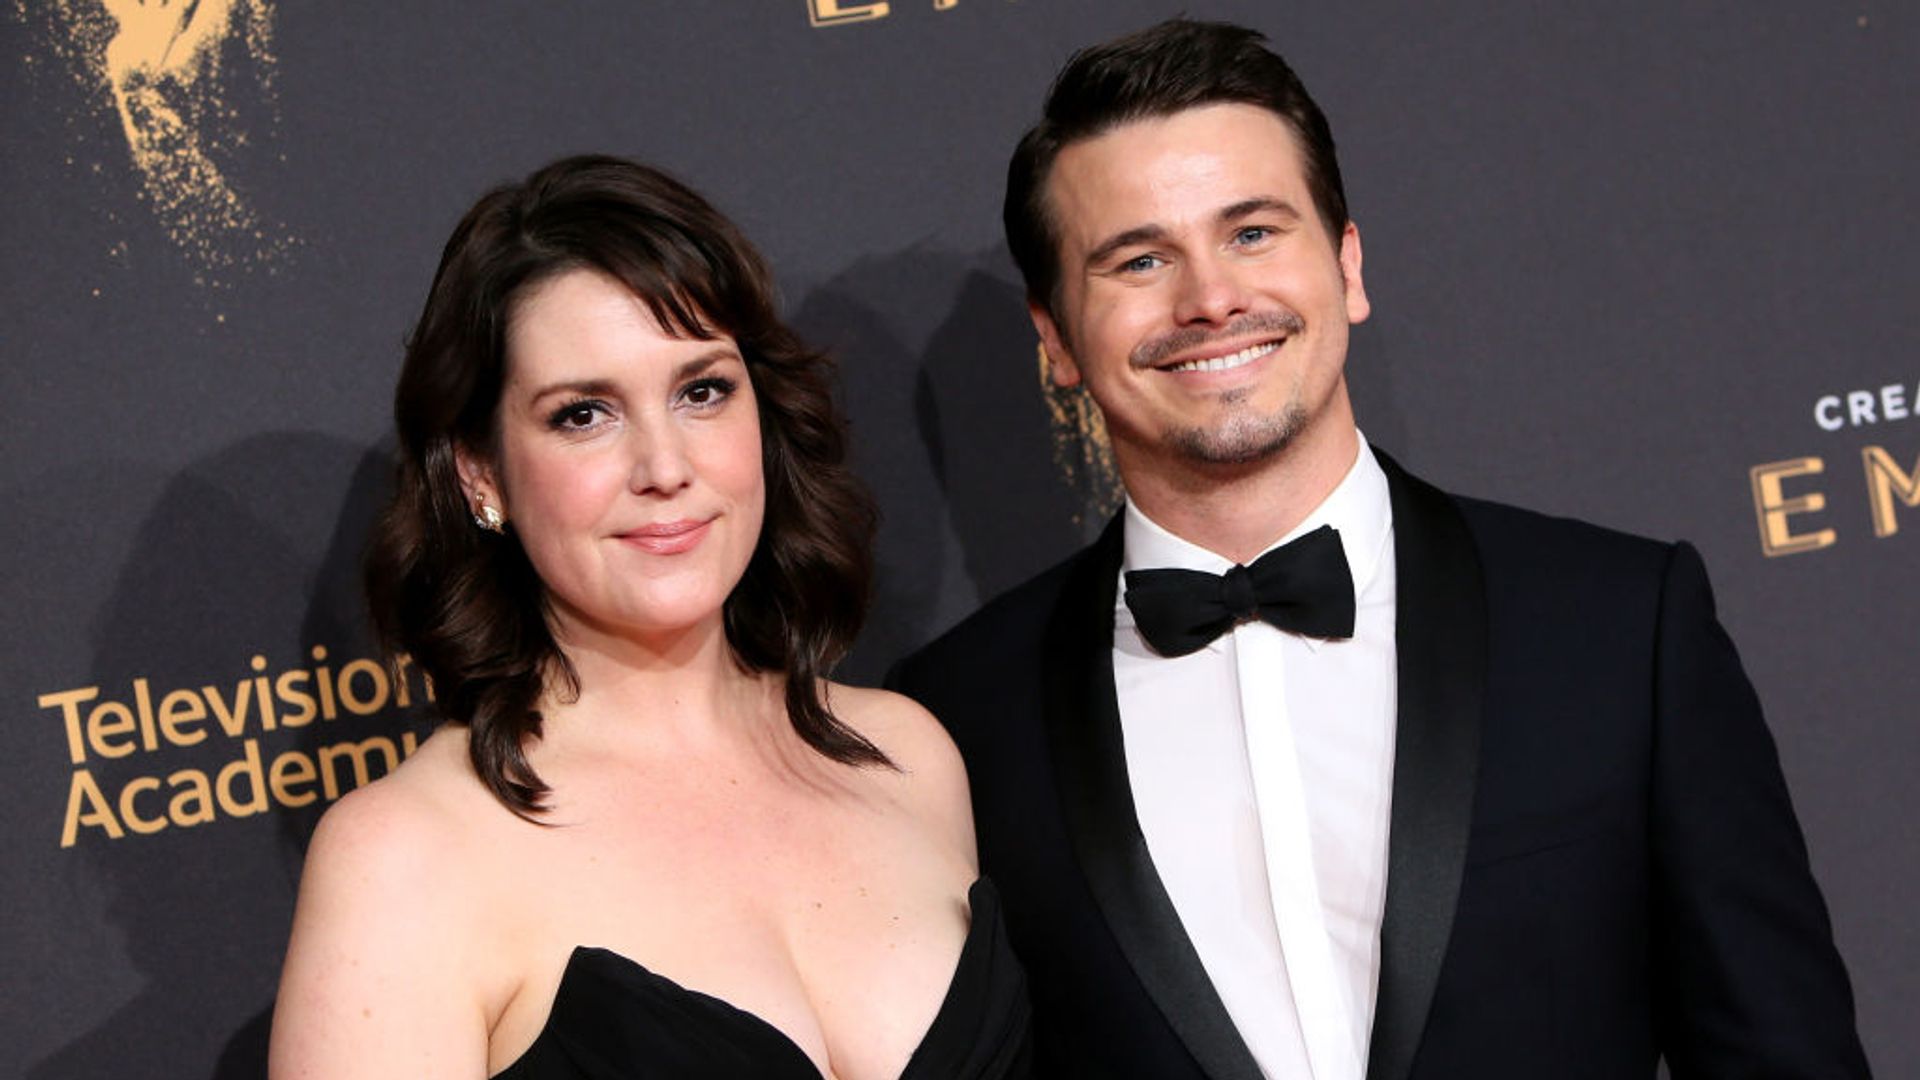 Actress Melanie Lynskey and actor Jason Ritter attend the 2017 Creative Arts Emmy Awards at Microsoft Theater on September 10, 2017